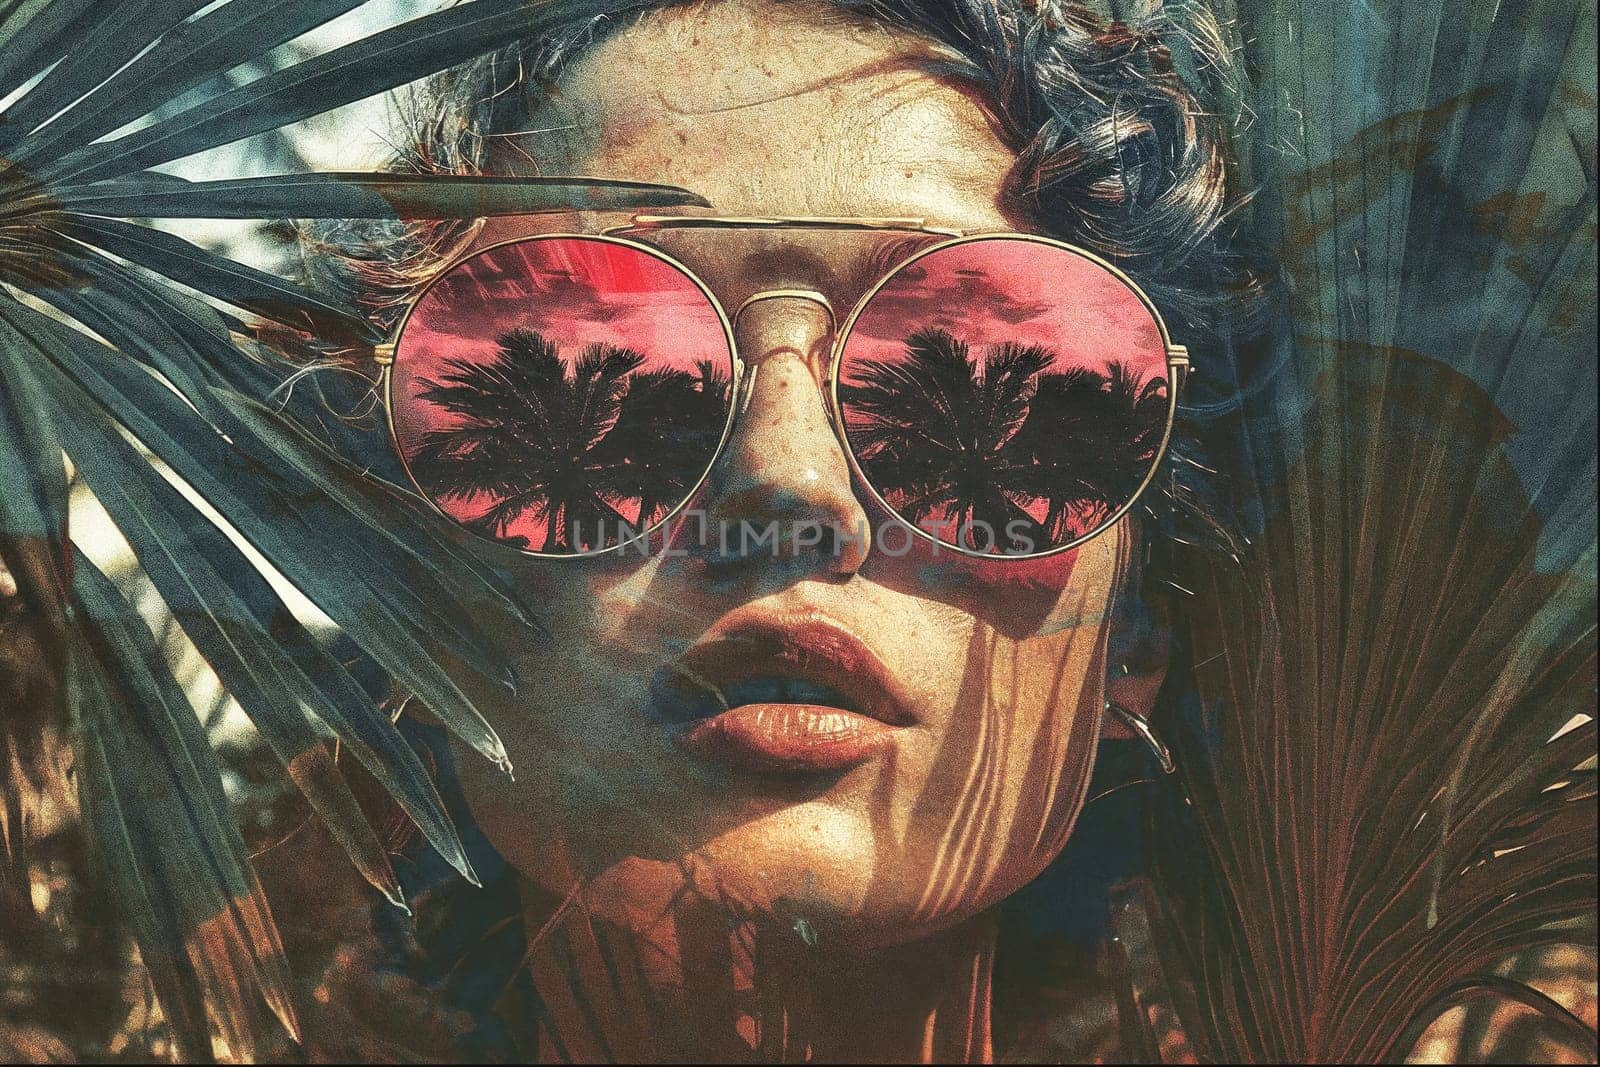 A woman in sunglasses stands in a tropical setting, with palm trees reflected in her lenses. The image has a vintage aesthetic.